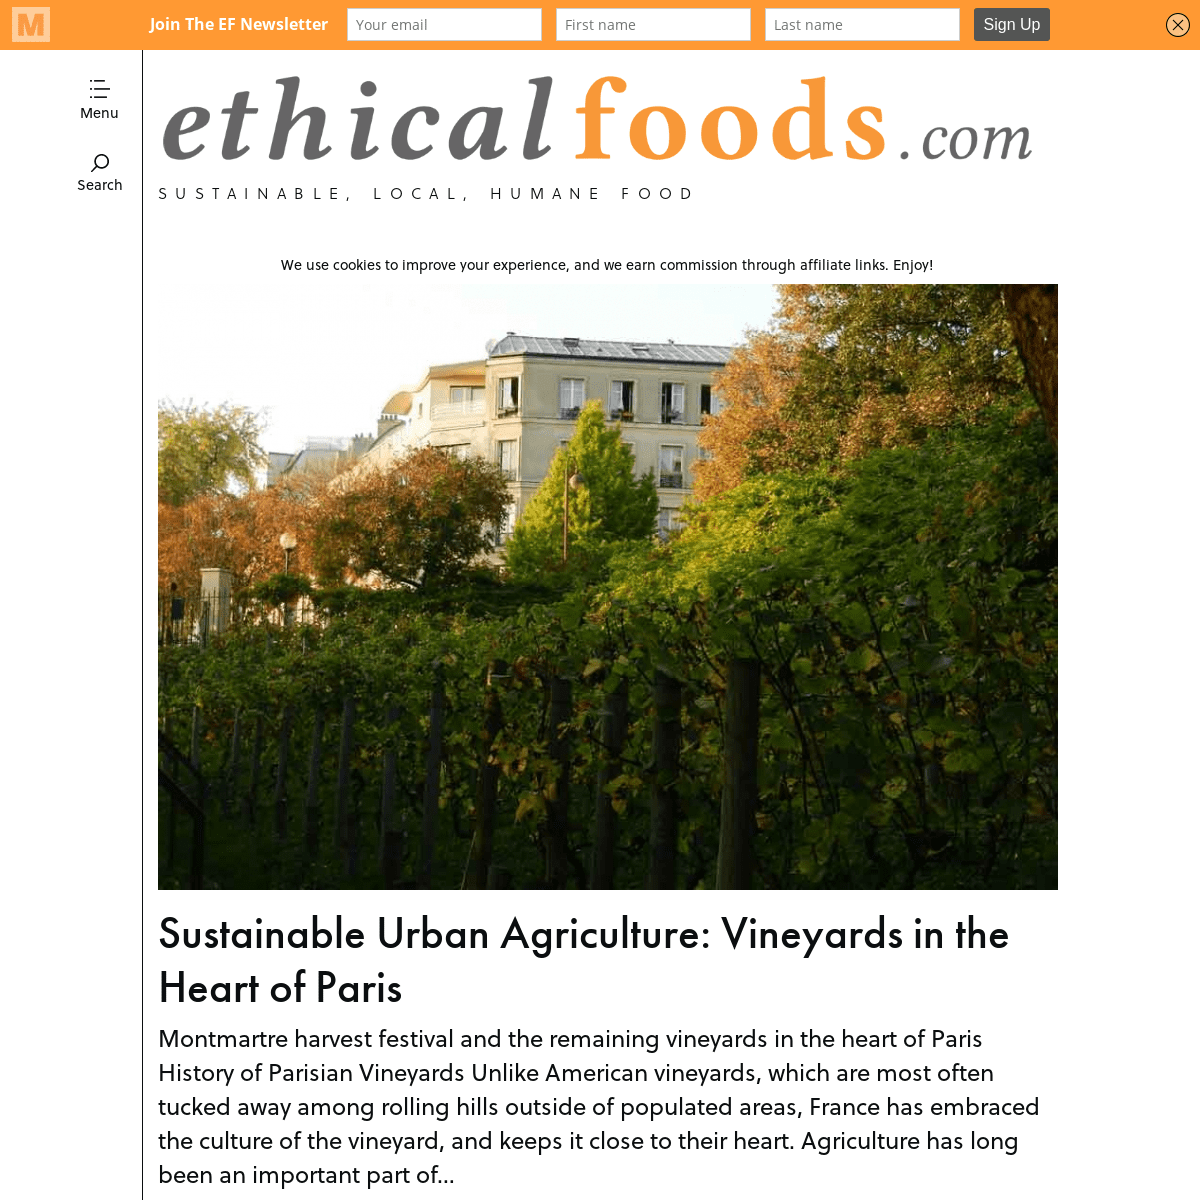 EthicalFoods.com | Sustainable, Local, Humane Food